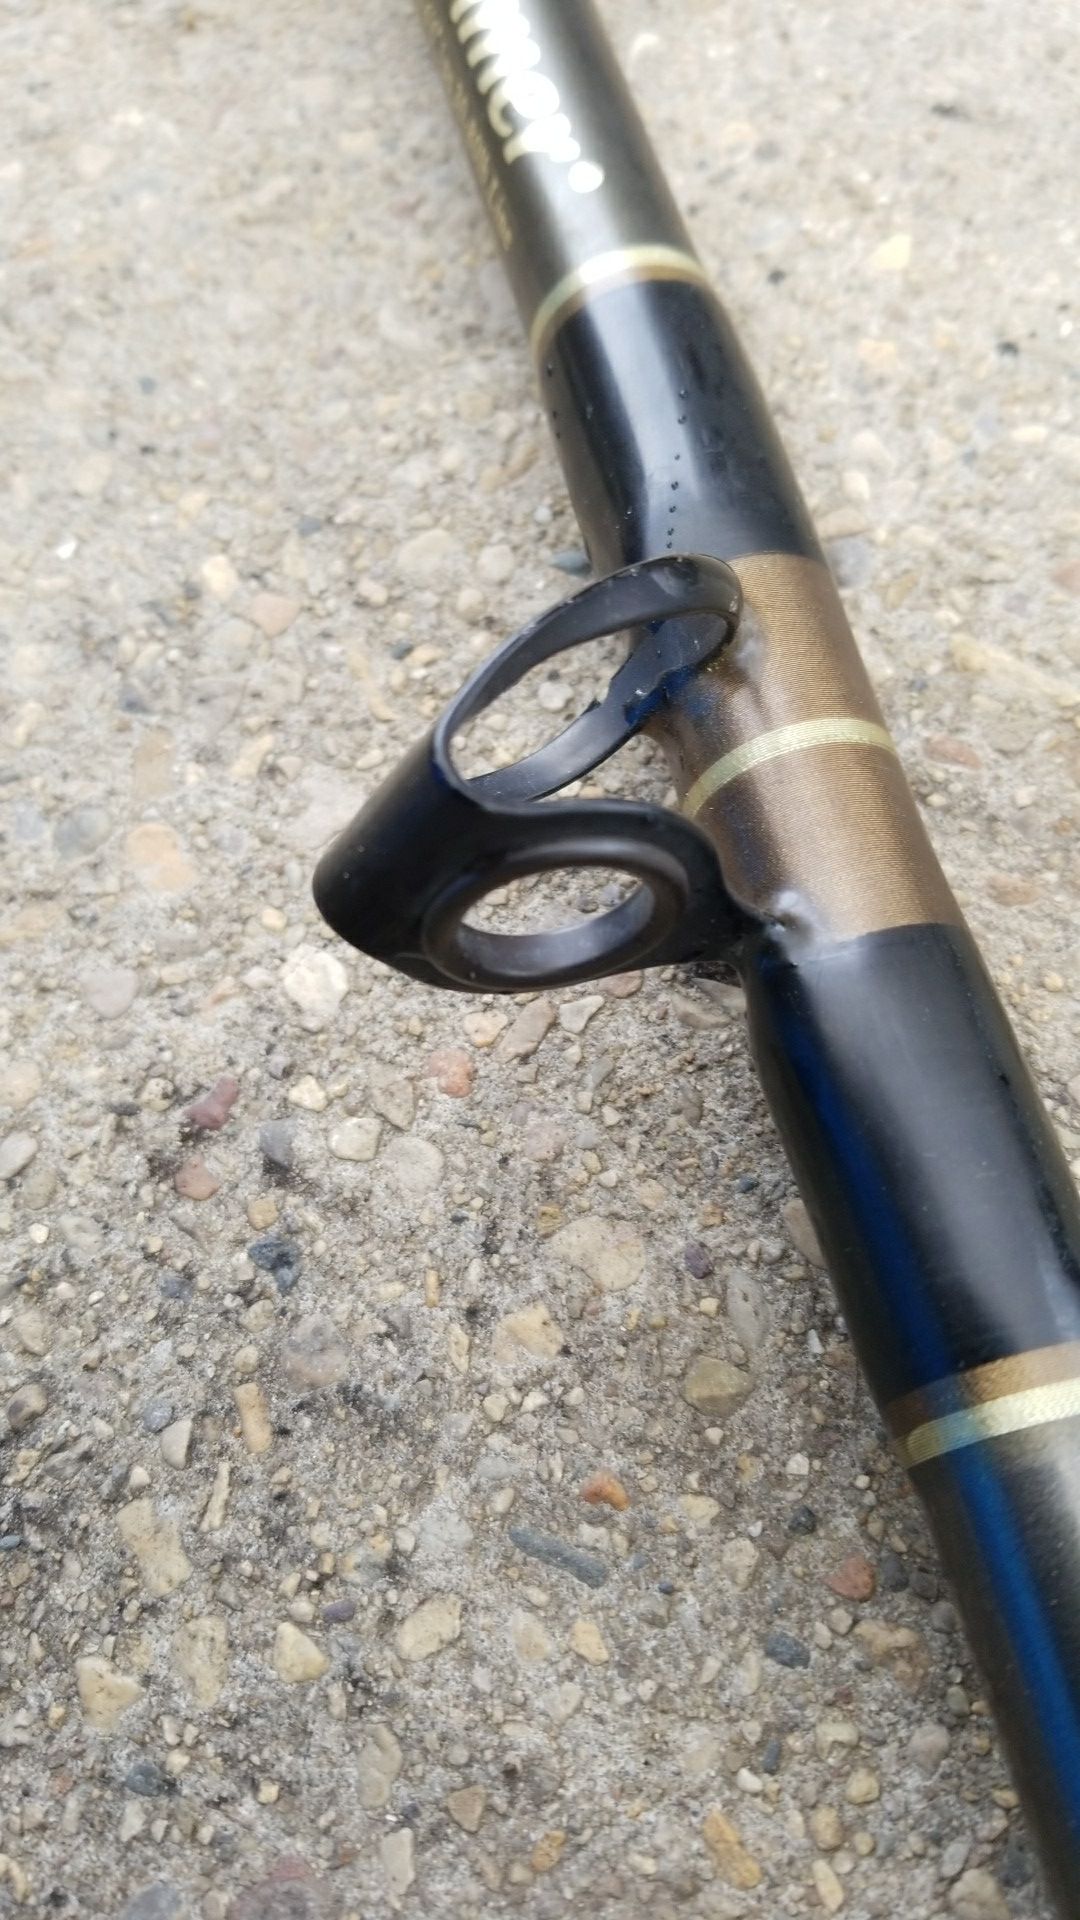 Penn Slammer SL3080CR66 Conventional Fishing Rod 0 for Sale in River Grove,  IL - OfferUp